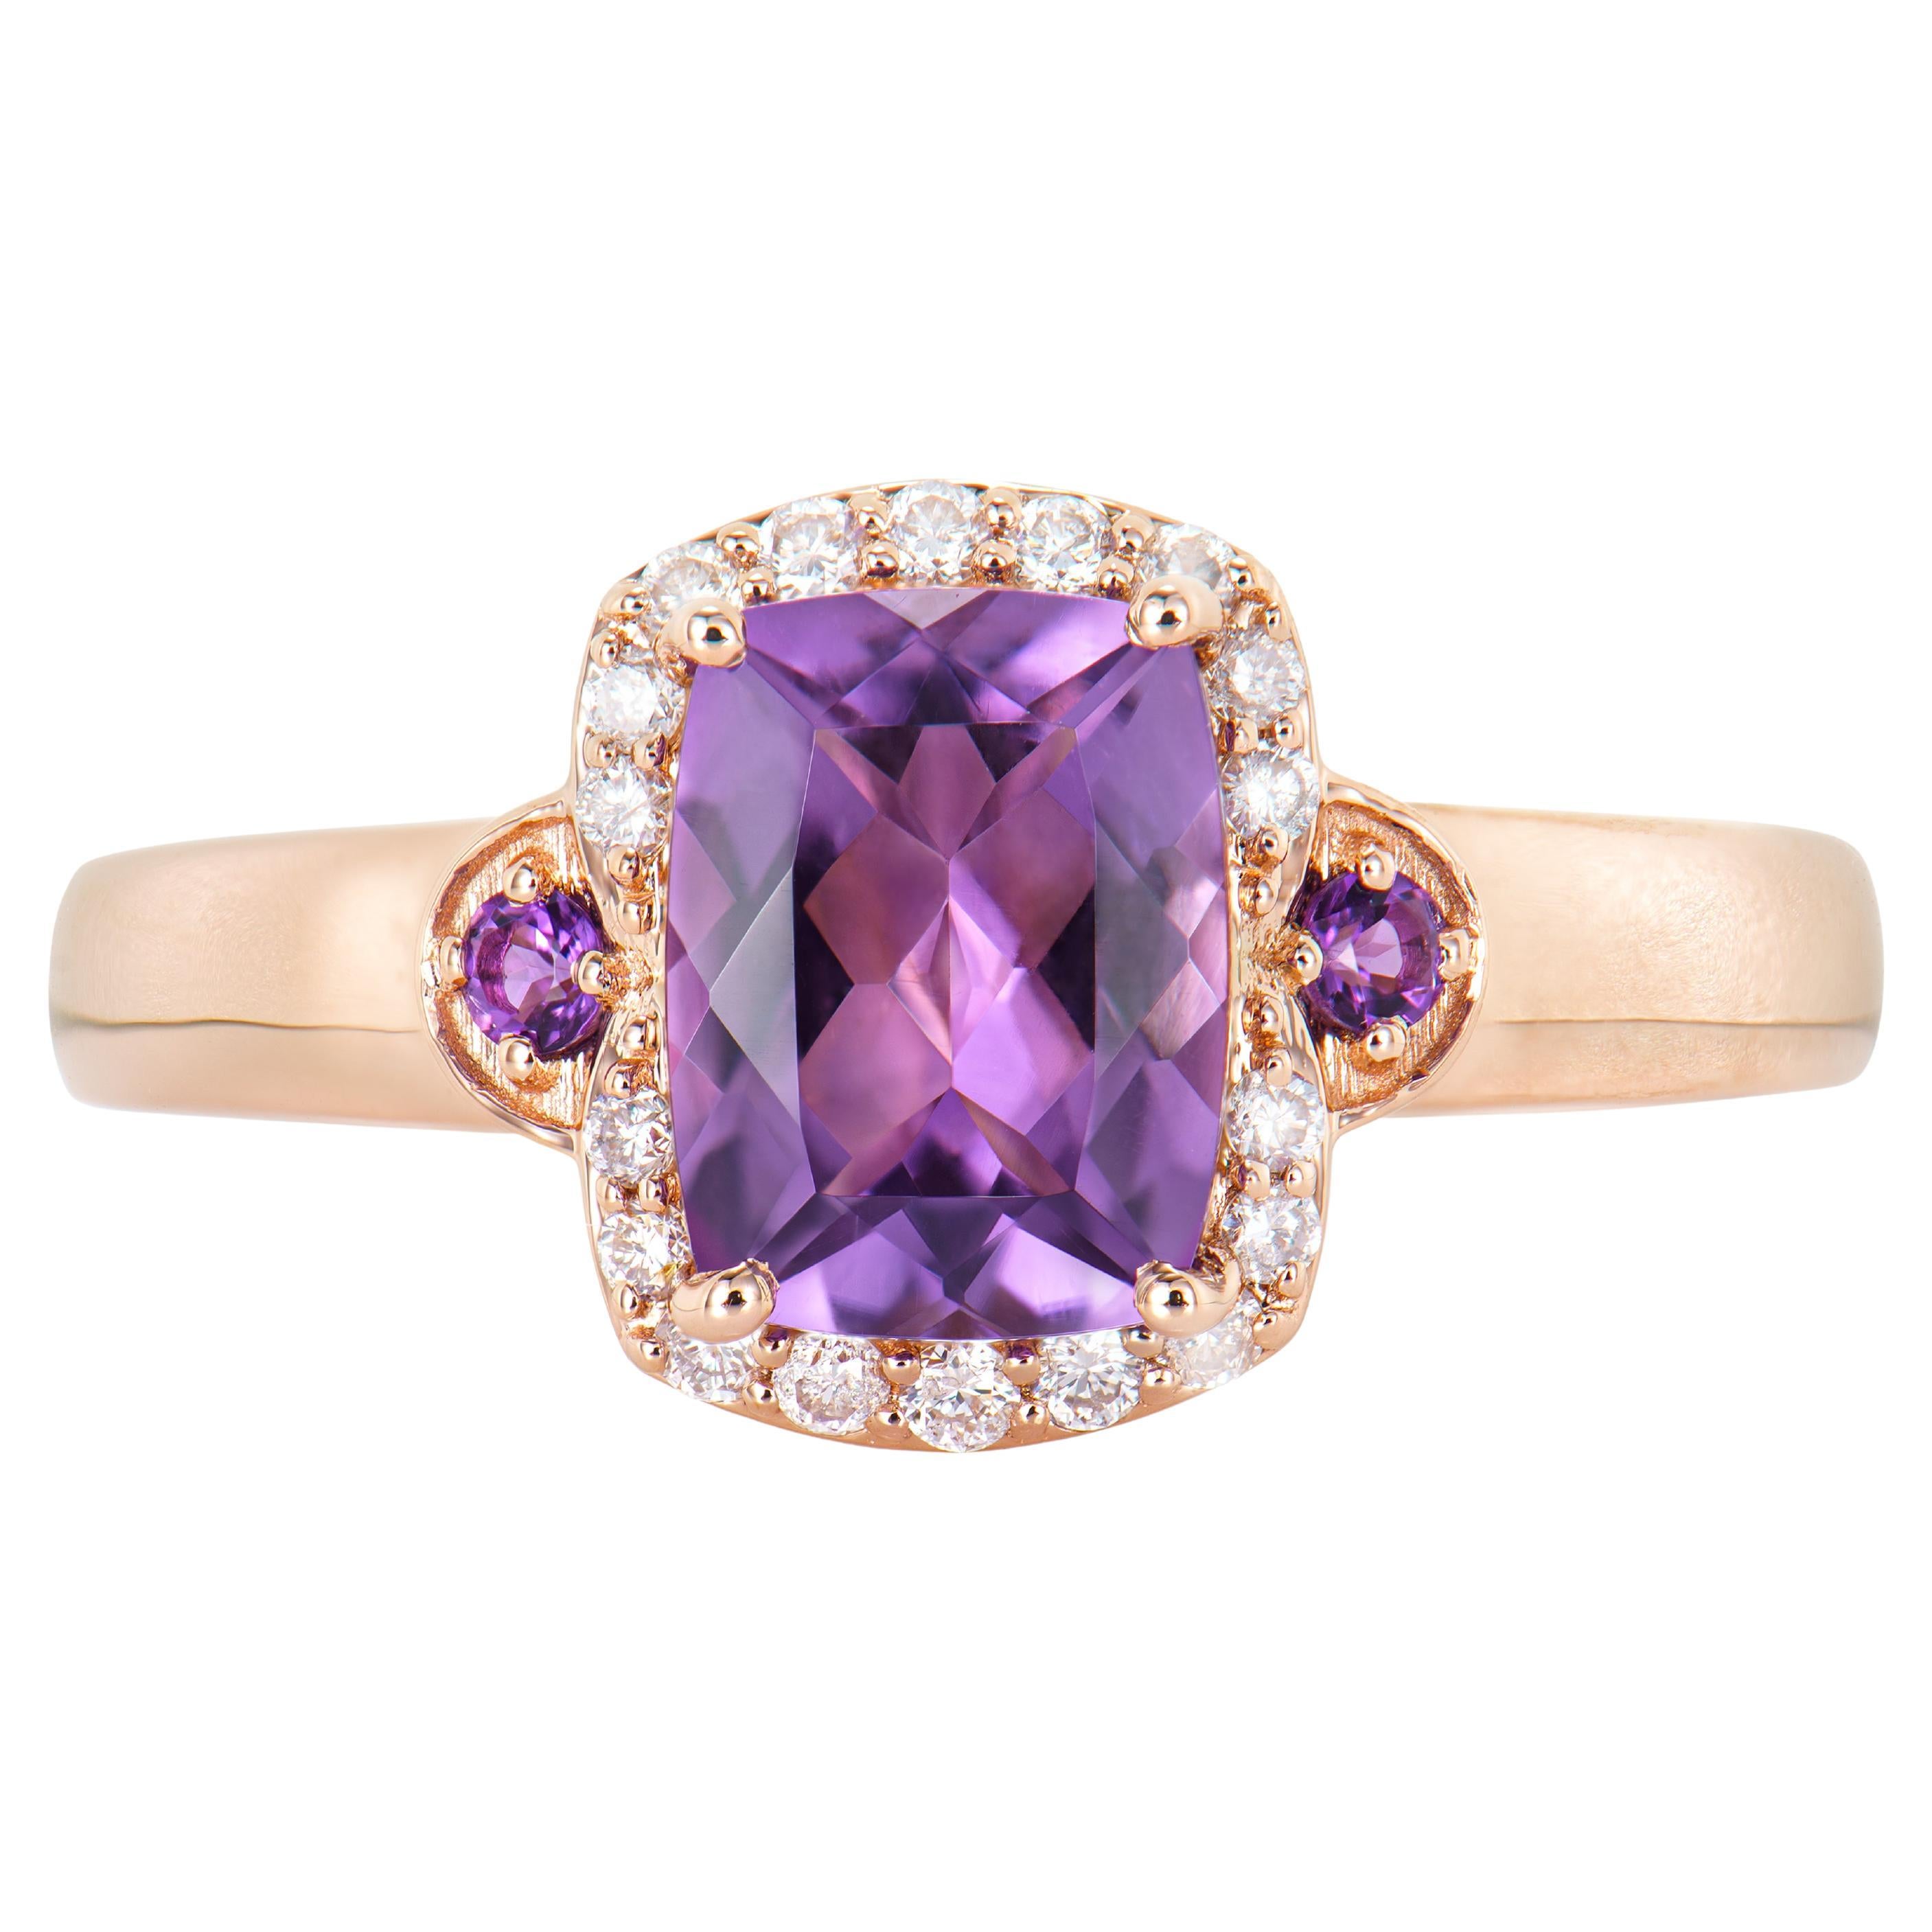 1.36 Carat Amethyst Fancy Ring in 14Karat Rose Gold with White Diamond.   For Sale